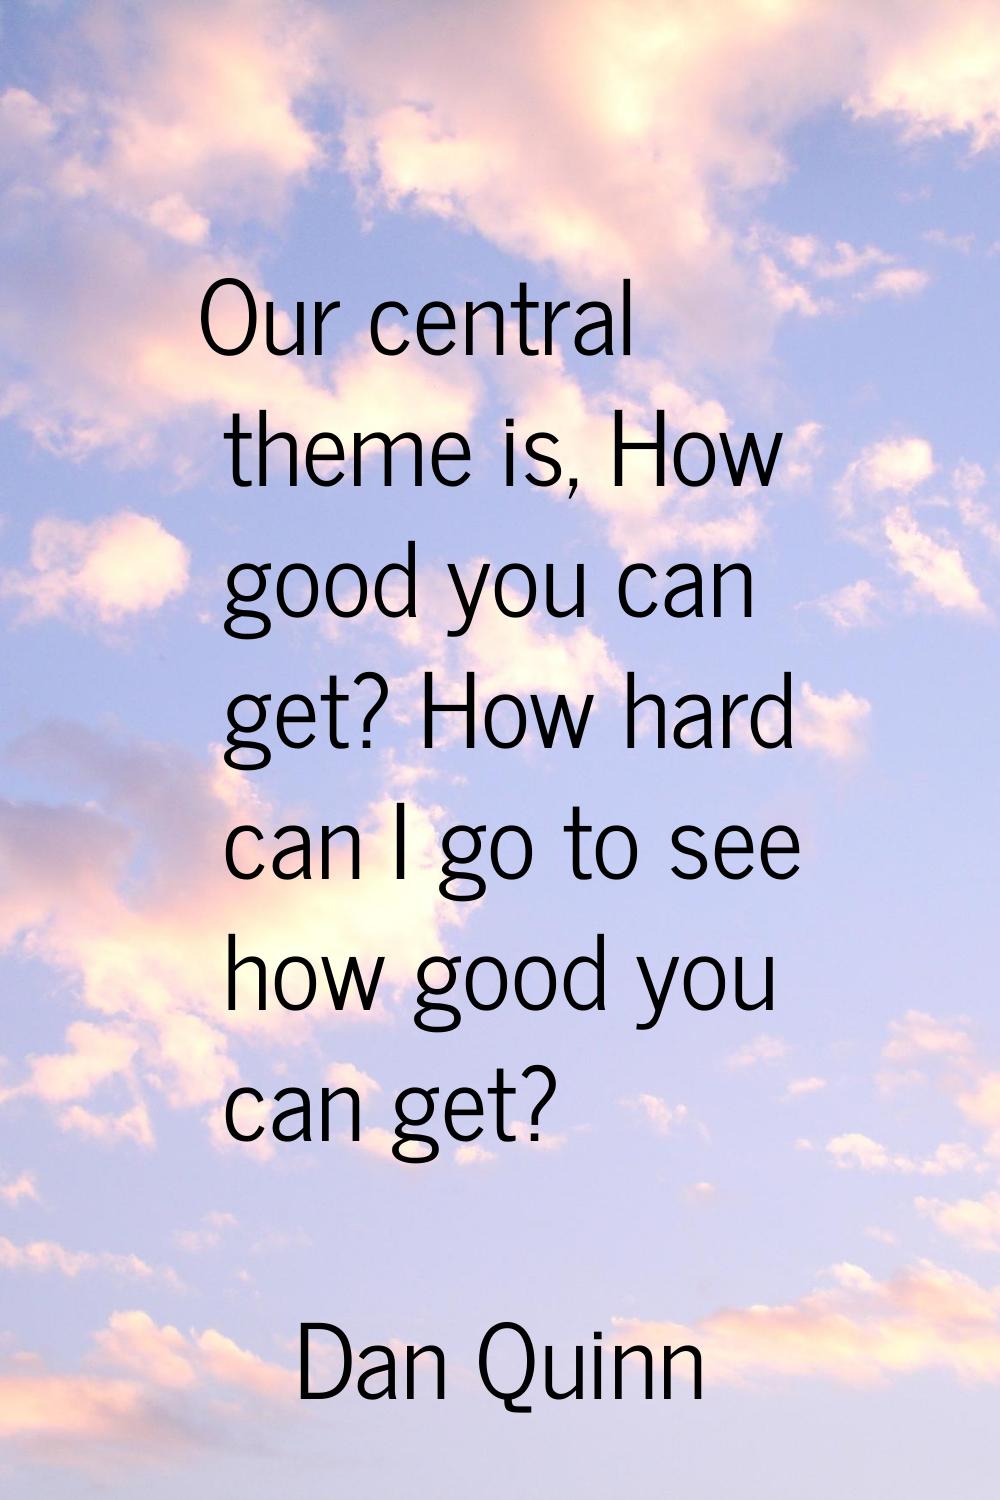 Our central theme is, How good you can get? How hard can I go to see how good you can get?